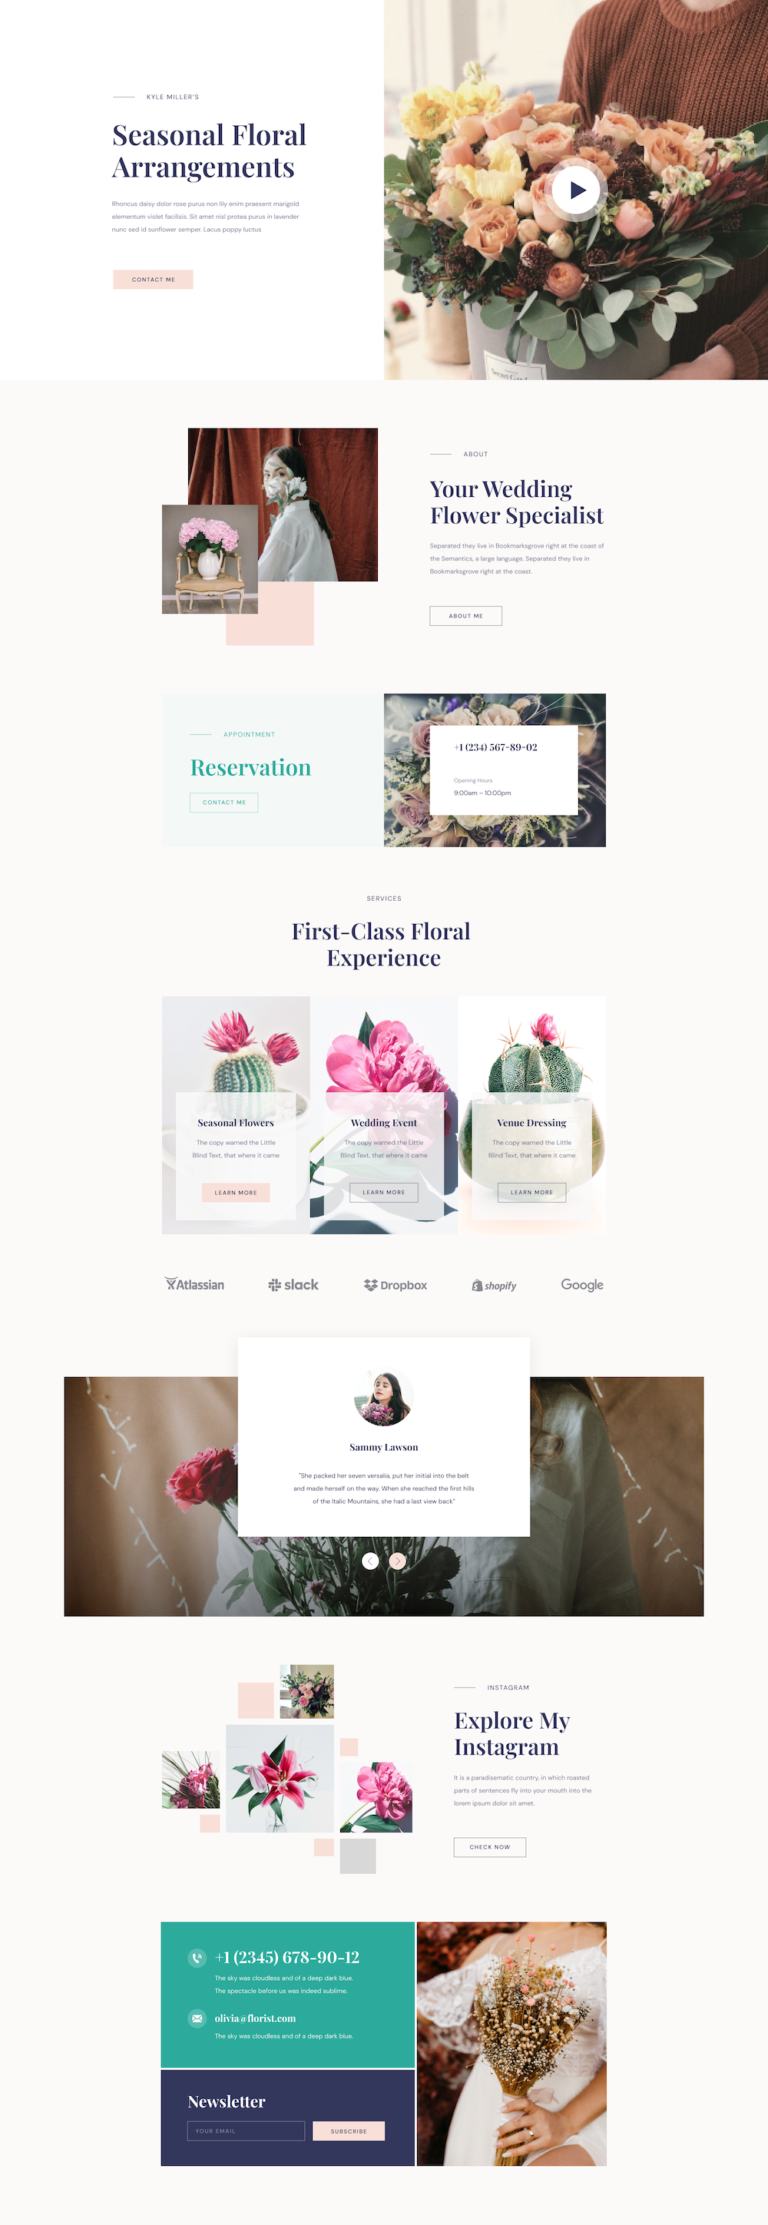 introducing-florist-a-free-layout-bundle-for-sp-page-builder-pro